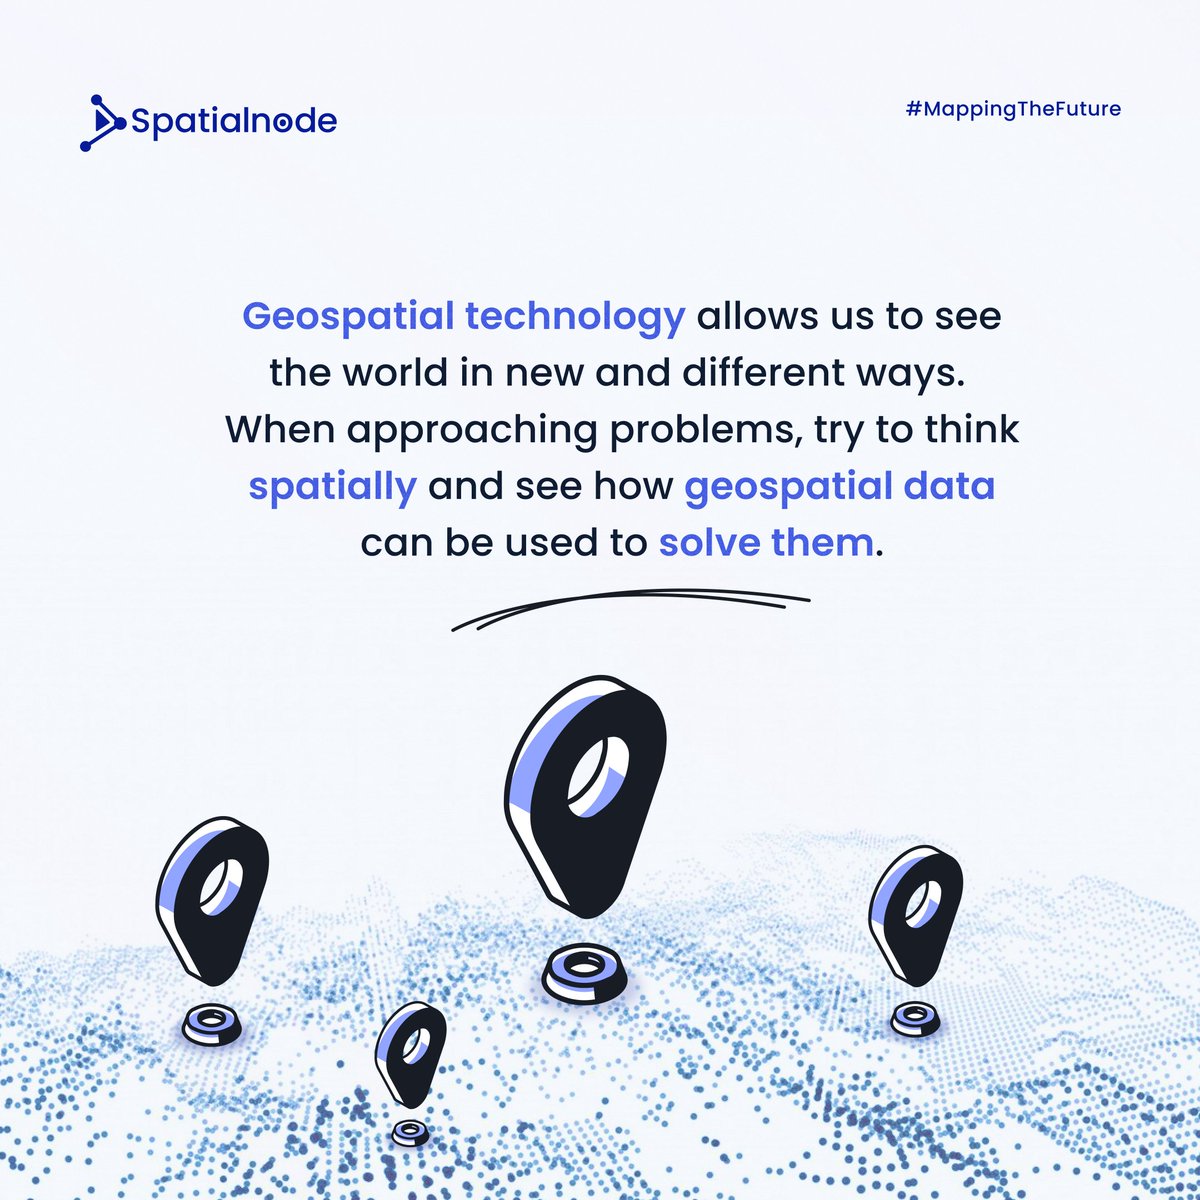 Spatialnode Monday Tips

It's a new week! Let's think spatially this week!

#geospatial #mondaymotivation #spatialdata